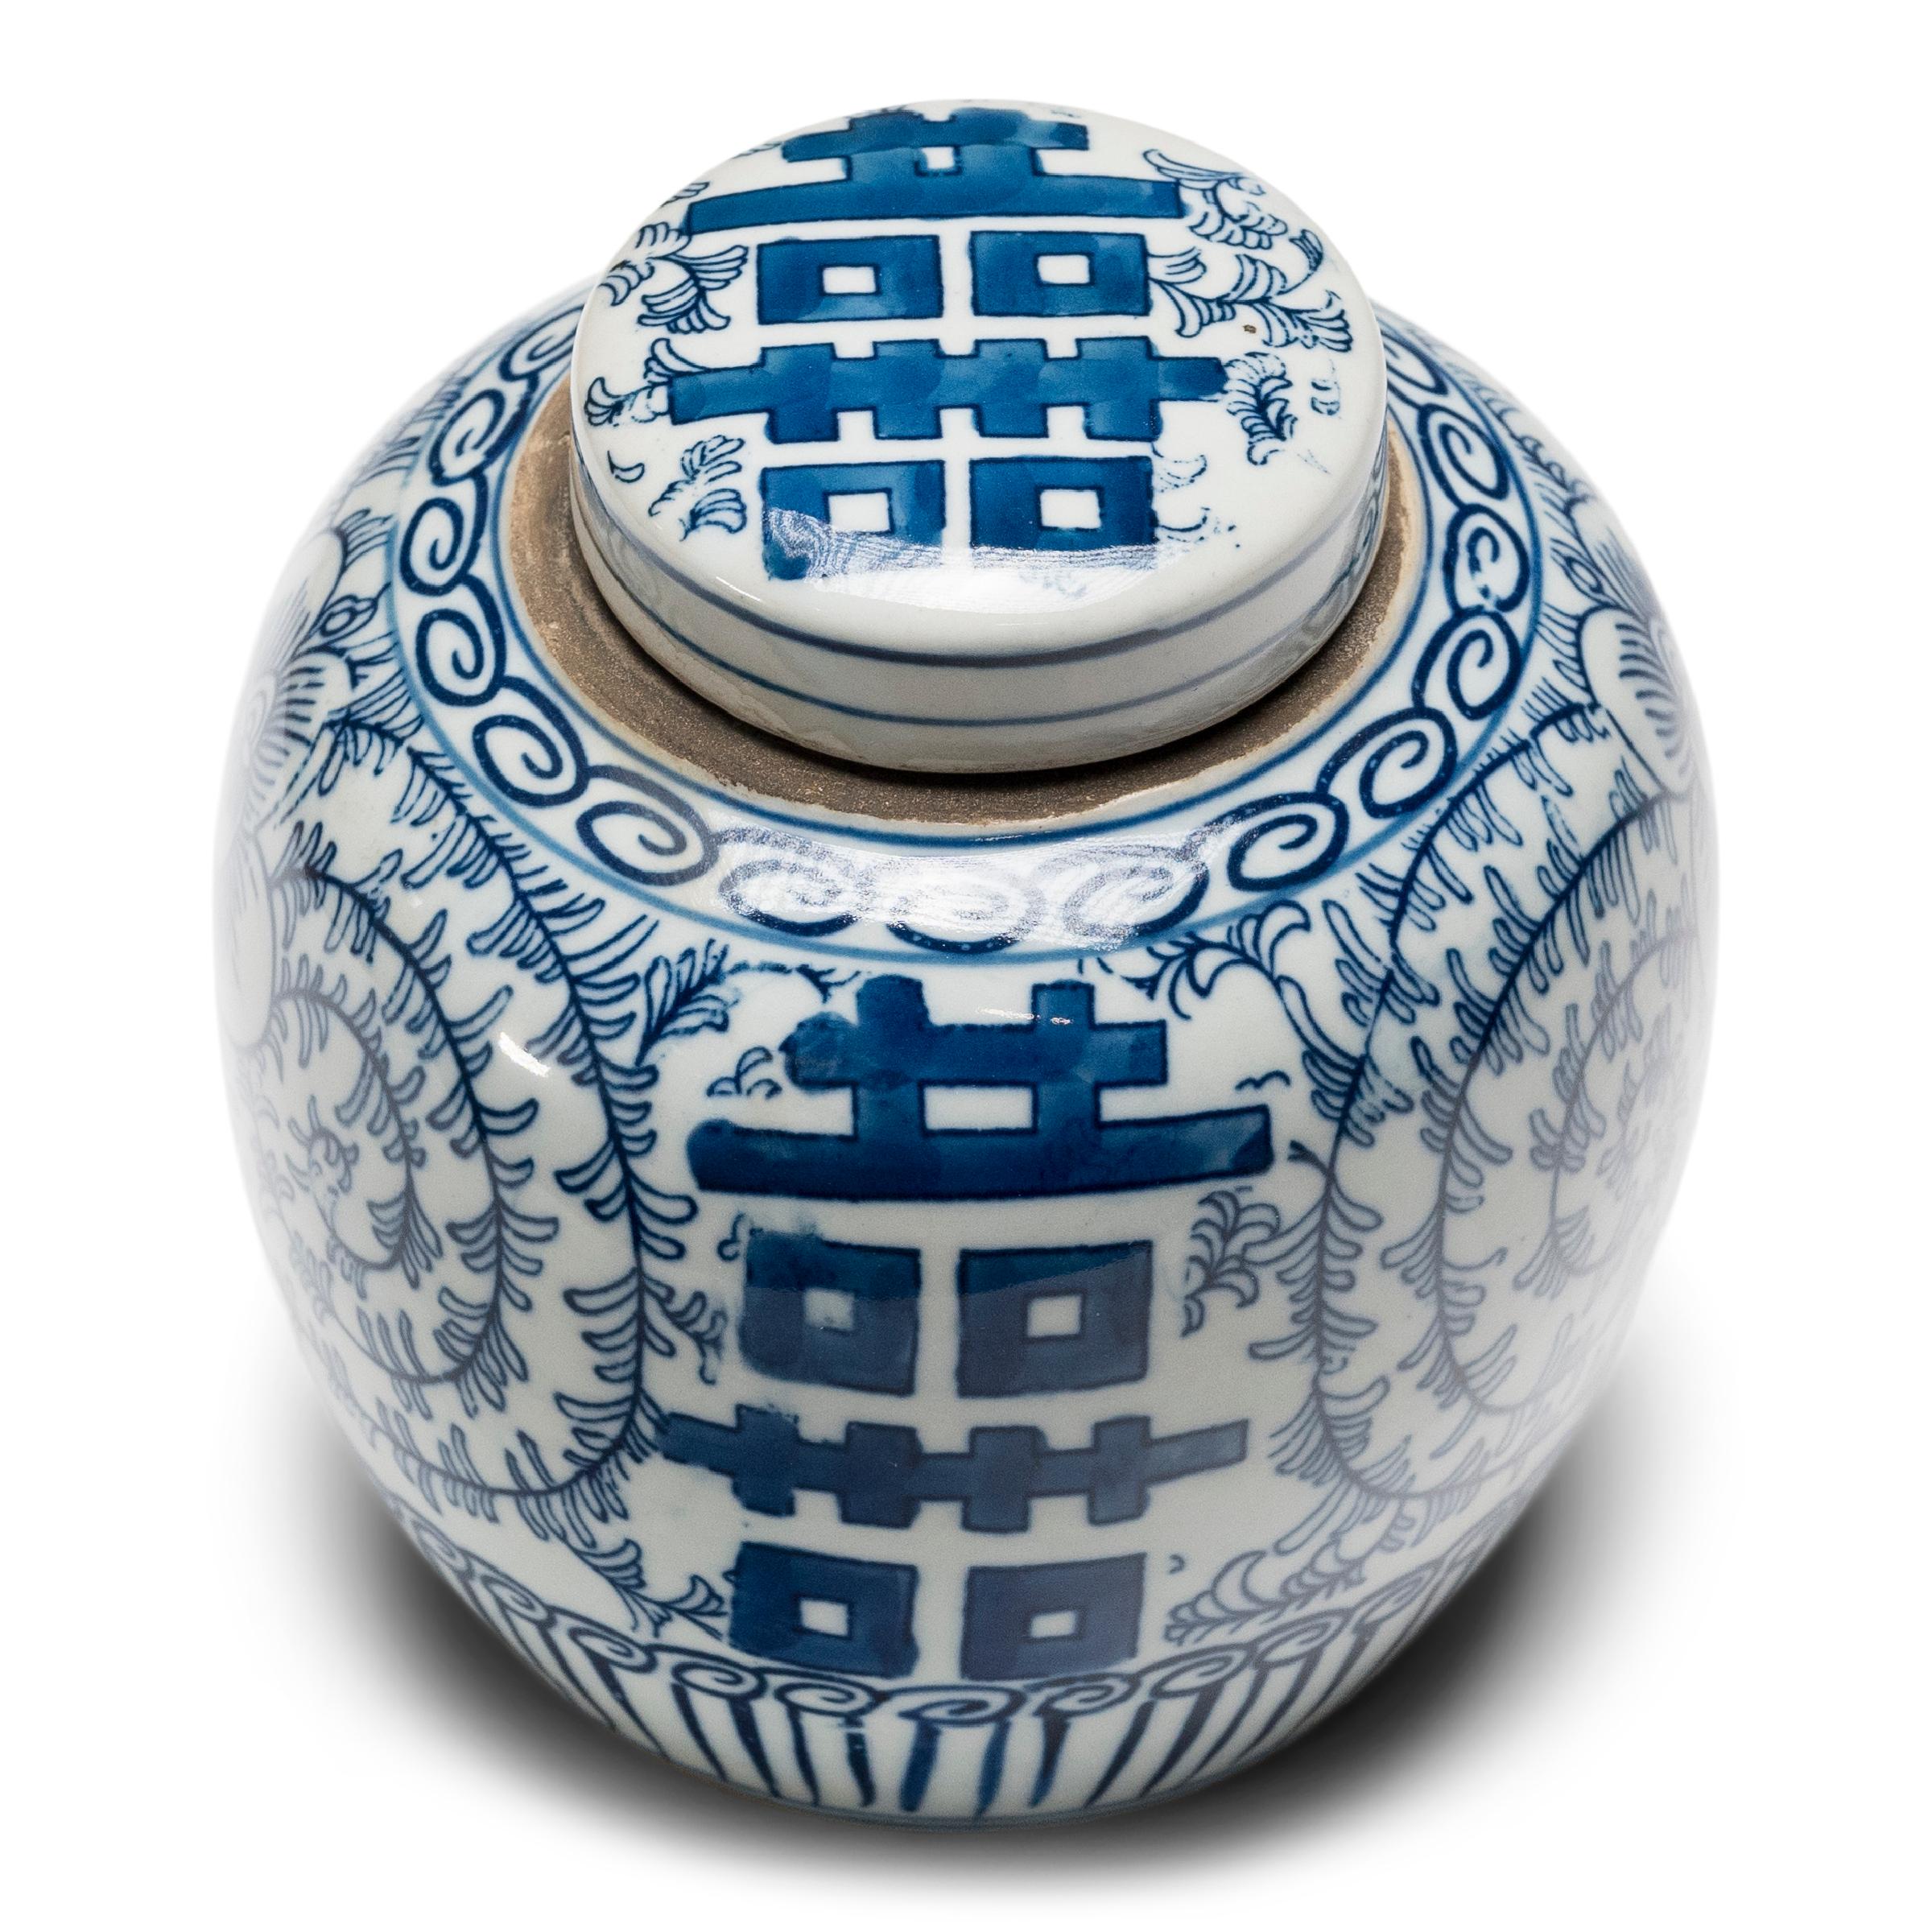 The symbol for double happiness adorns this small tea leaf jar with best wishes for love, companionship and marital bliss. Glazed in the classic blue and white manner, the small porcelain jar has a rounded form and flat lid, a traditional shape for